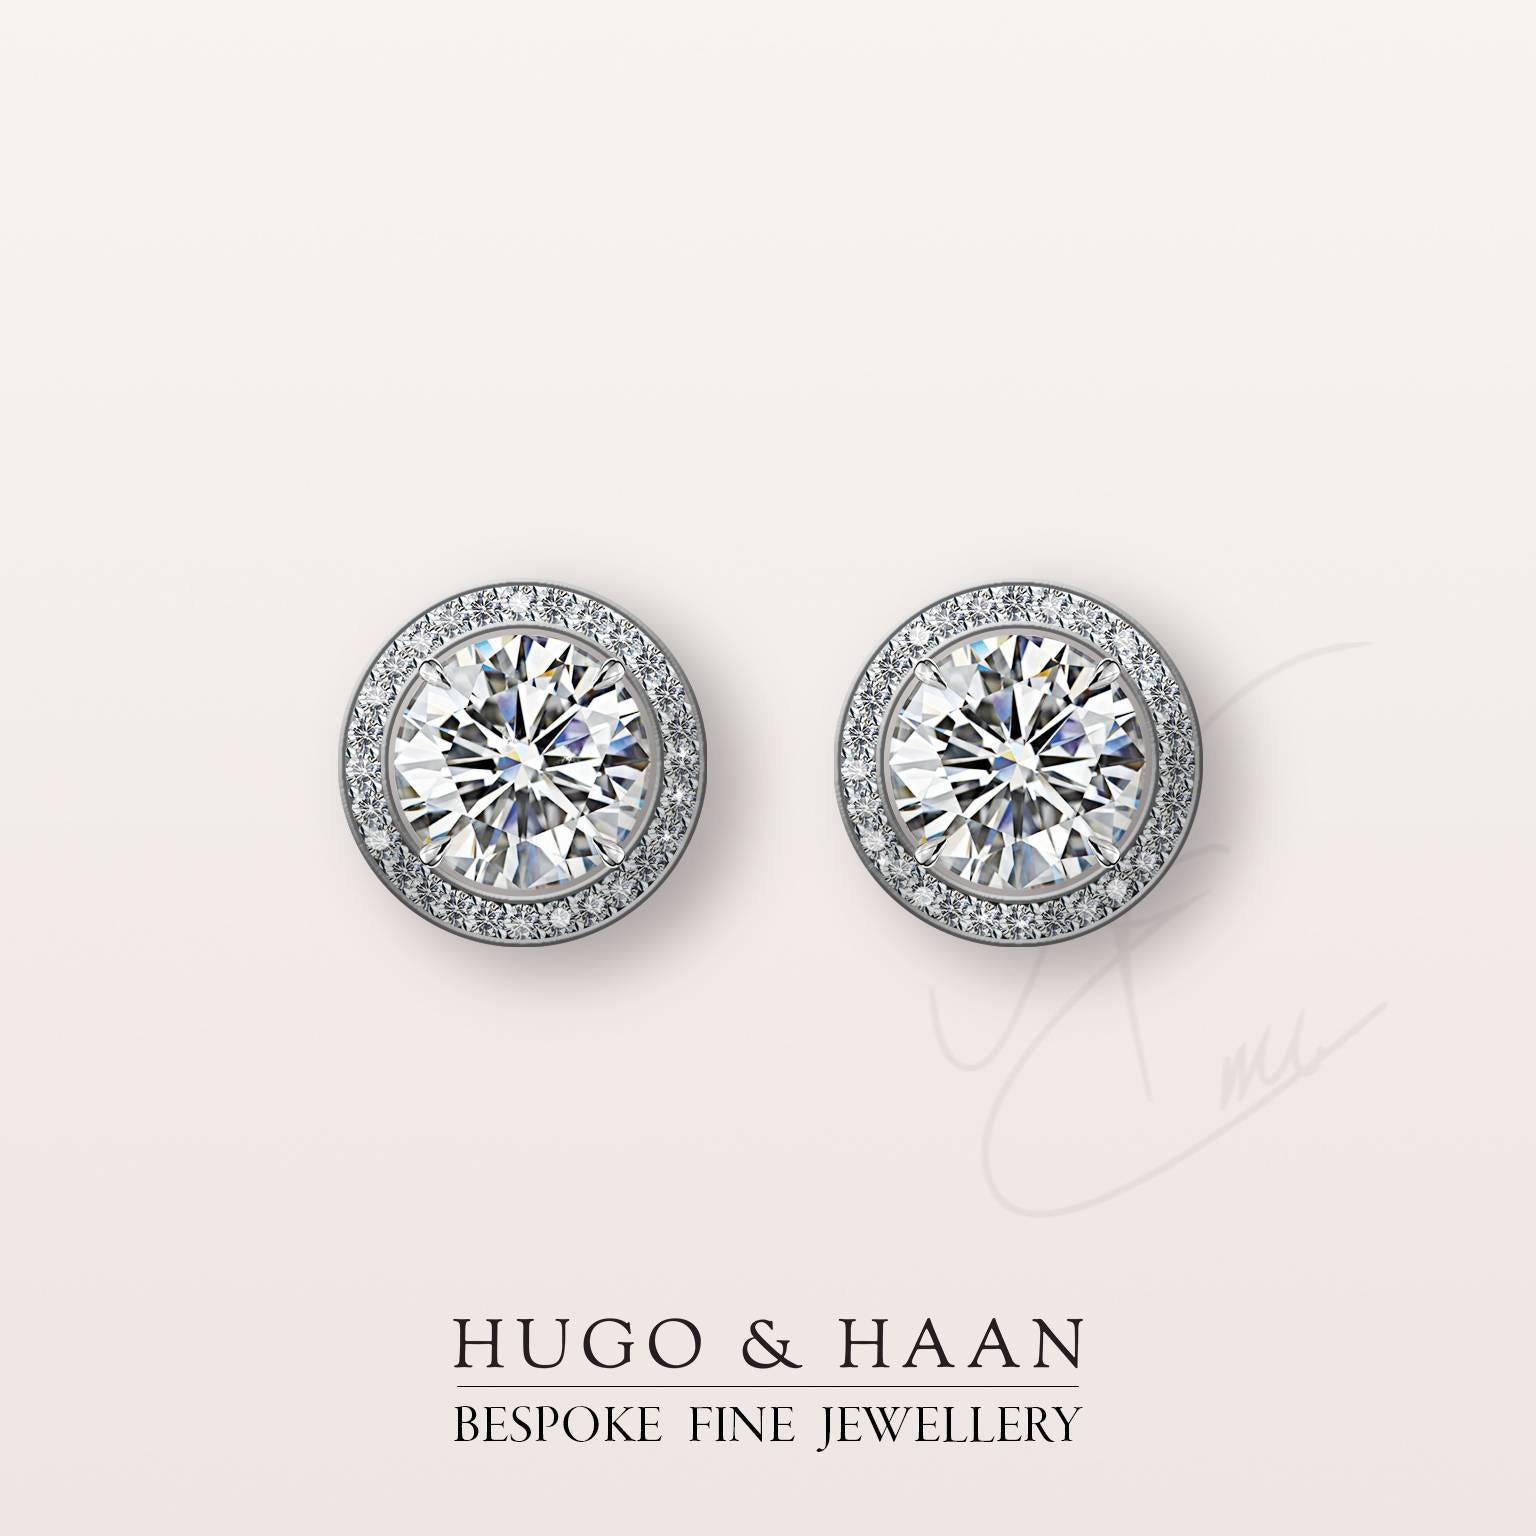 Details:

Material : Platinum
Principle Gemstone : Round Brilliant Cut White Diamond
Other Gemstone : White Diamond Pave
Total Diamond Carat Weight : over 2 tcw 
Diamonds Certified: Yes - GIA certified
Customizable: Yes

Options to customize: